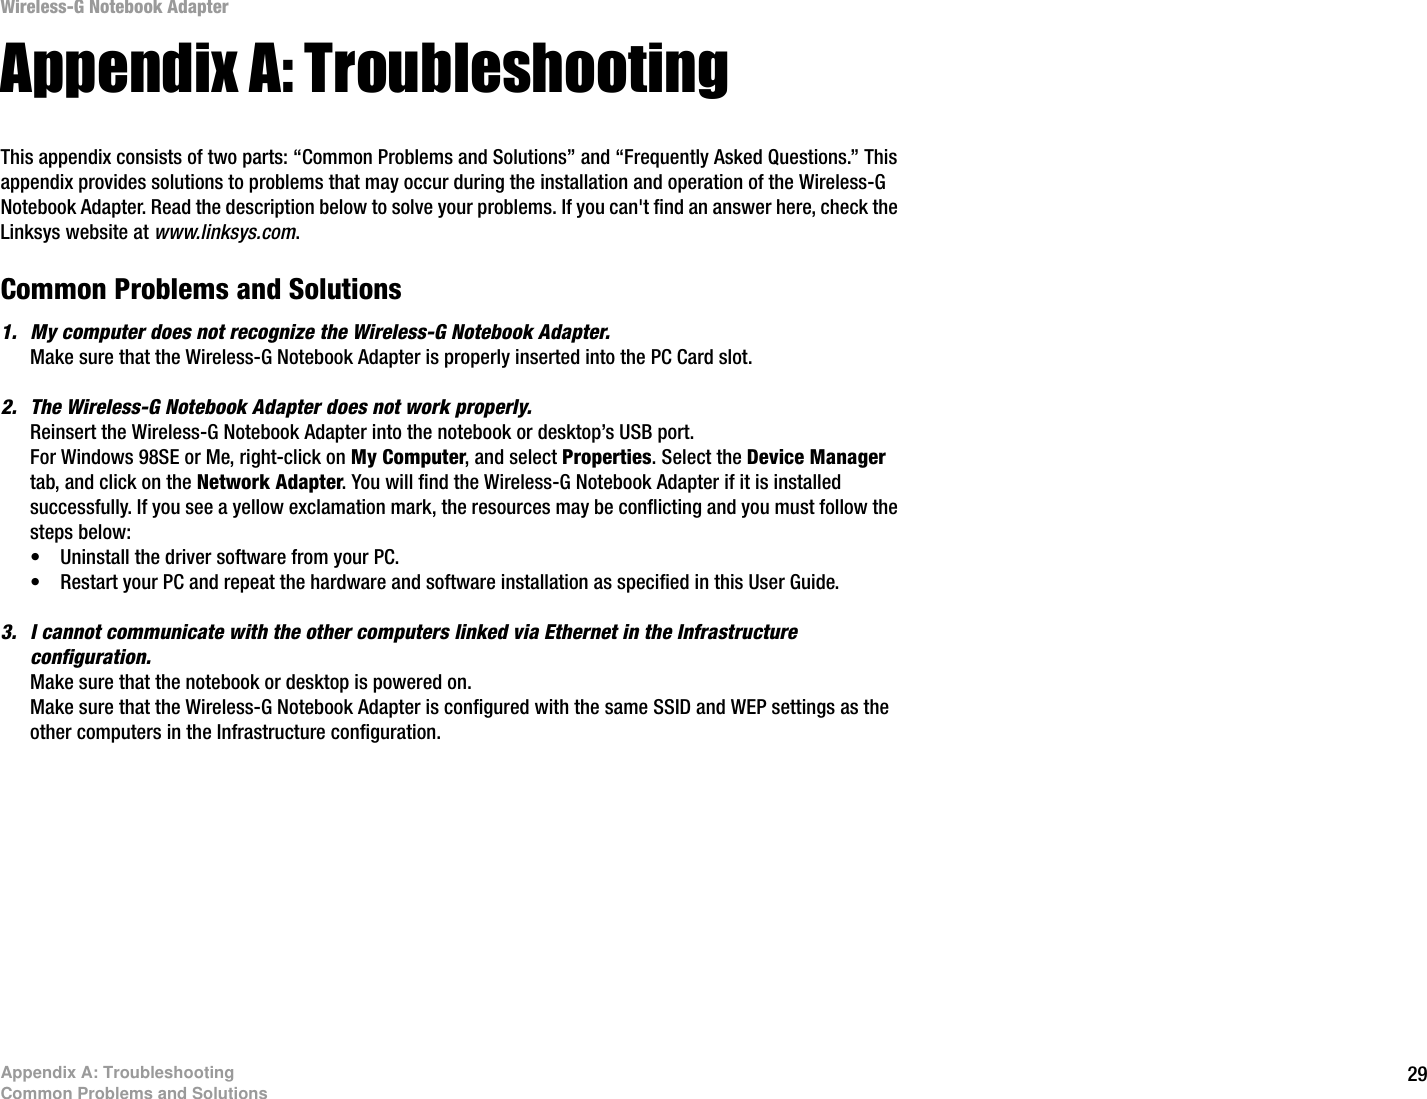 29Appendix A: TroubleshootingCommon Problems and SolutionsWireless-G Notebook AdapterAppendix A: TroubleshootingThis appendix consists of two parts: “Common Problems and Solutions” and “Frequently Asked Questions.” This appendix provides solutions to problems that may occur during the installation and operation of the Wireless-G Notebook Adapter. Read the description below to solve your problems. If you can&apos;t find an answer here, check the Linksys website at www.linksys.com.Common Problems and Solutions1. My computer does not recognize the Wireless-G Notebook Adapter.Make sure that the Wireless-G Notebook Adapter is properly inserted into the PC Card slot.2. The Wireless-G Notebook Adapter does not work properly.Reinsert the Wireless-G Notebook Adapter into the notebook or desktop’s USB port. For Windows 98SE or Me, right-click on My Computer, and select Properties. Select the Device Manager tab, and click on the Network Adapter. You will find the Wireless-G Notebook Adapter if it is installed successfully. If you see a yellow exclamation mark, the resources may be conflicting and you must follow the steps below:• Uninstall the driver software from your PC.• Restart your PC and repeat the hardware and software installation as specified in this User Guide.3. I cannot communicate with the other computers linked via Ethernet in the Infrastructure configuration.Make sure that the notebook or desktop is powered on.Make sure that the Wireless-G Notebook Adapter is configured with the same SSID and WEP settings as the other computers in the Infrastructure configuration. 